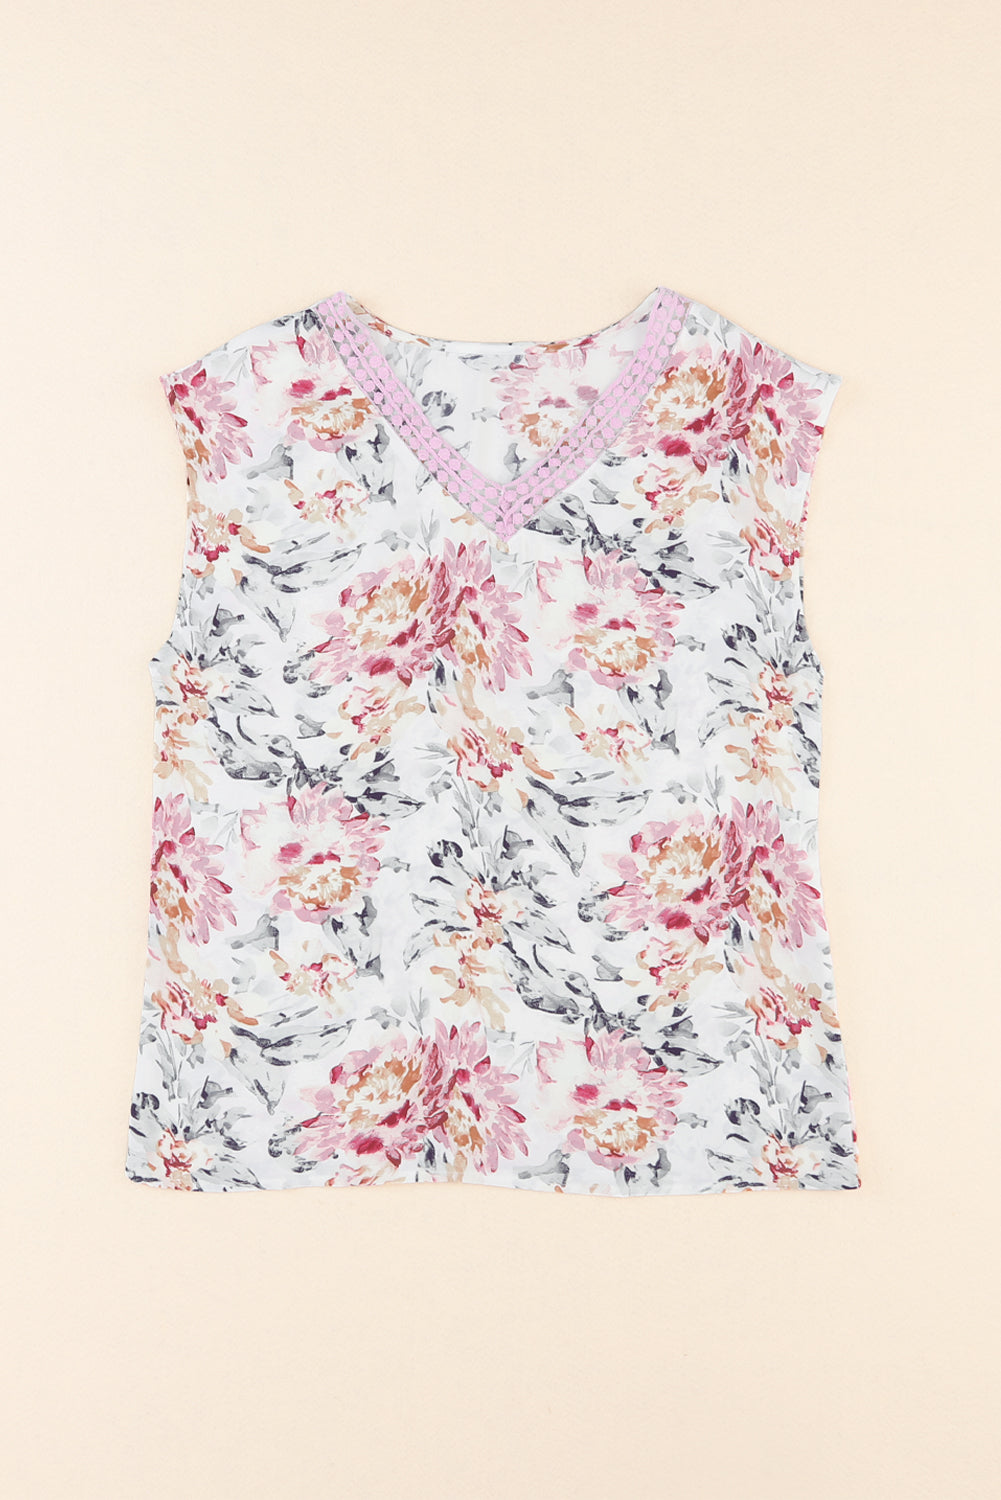 Pink Floral Print Lace Splicing Sleeveless Blouse